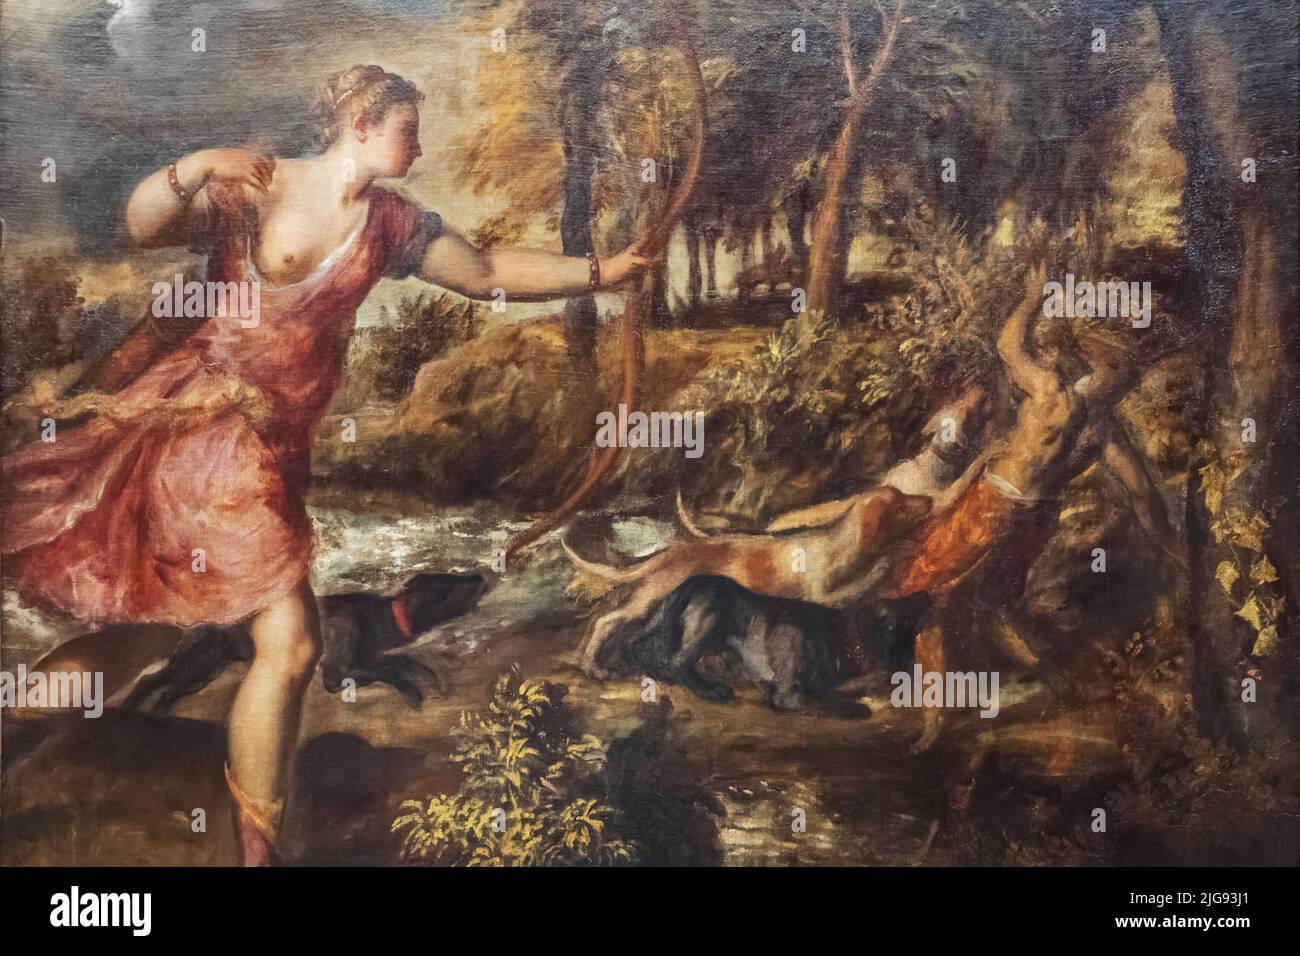 Painting titled 'The Death of Actaeon' by Italian Artist Titian dated 1559 Stock Photo